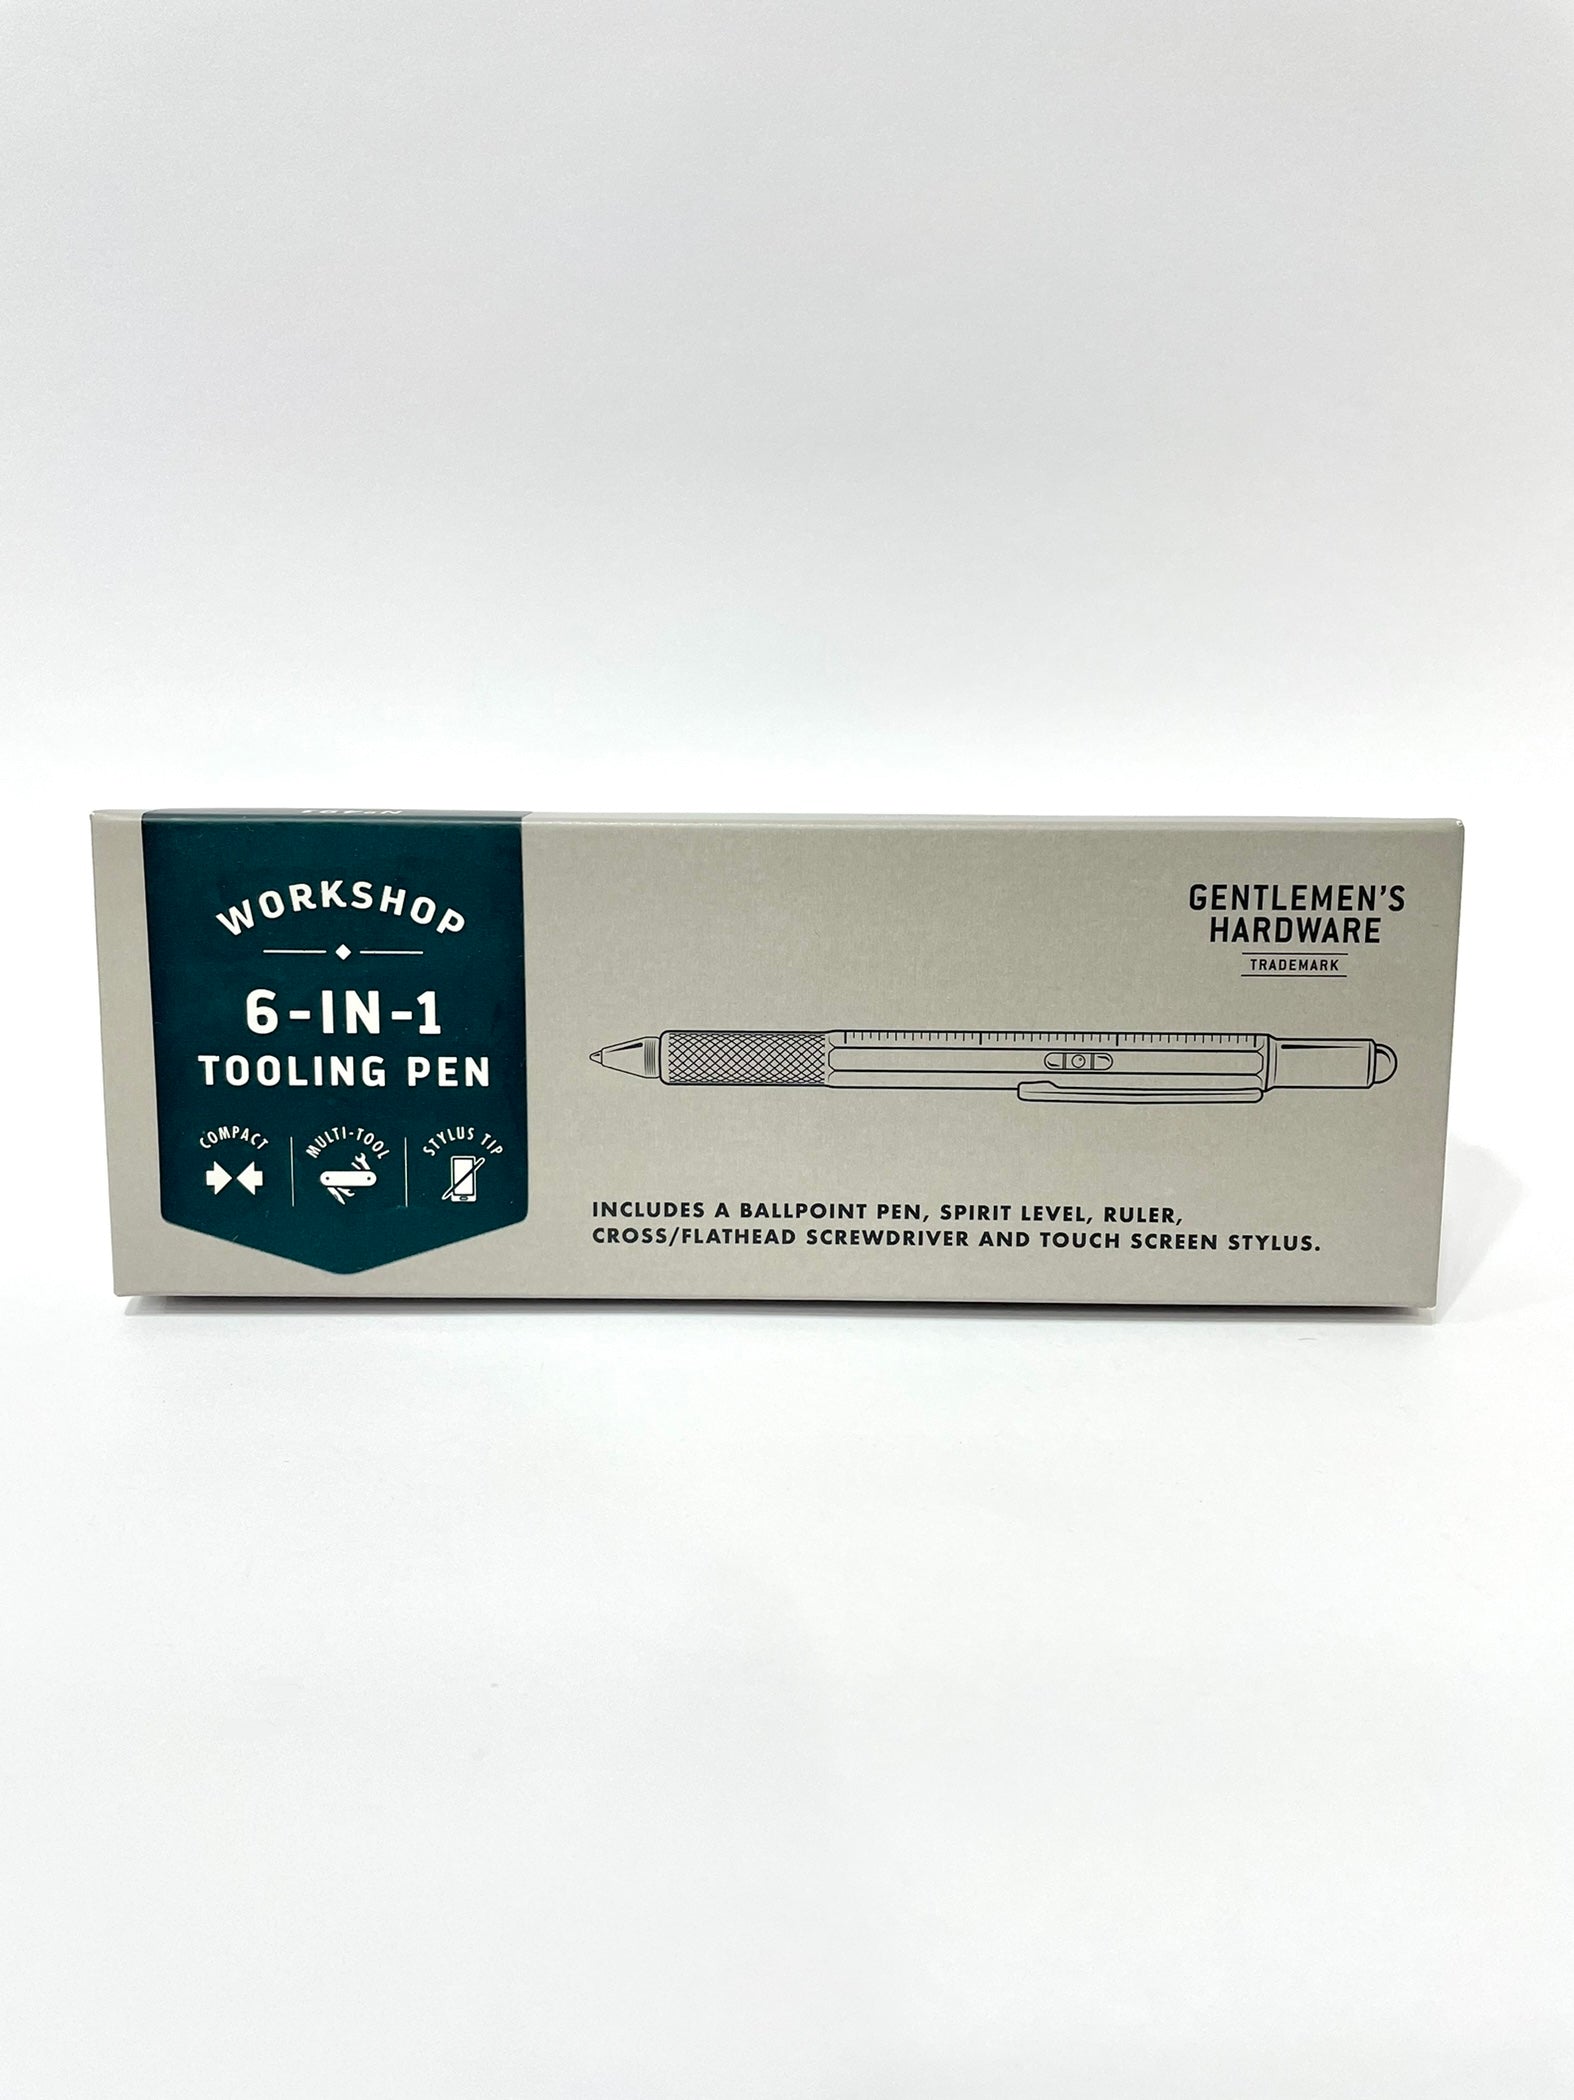 GH 6 in 1 TOOLING PEN